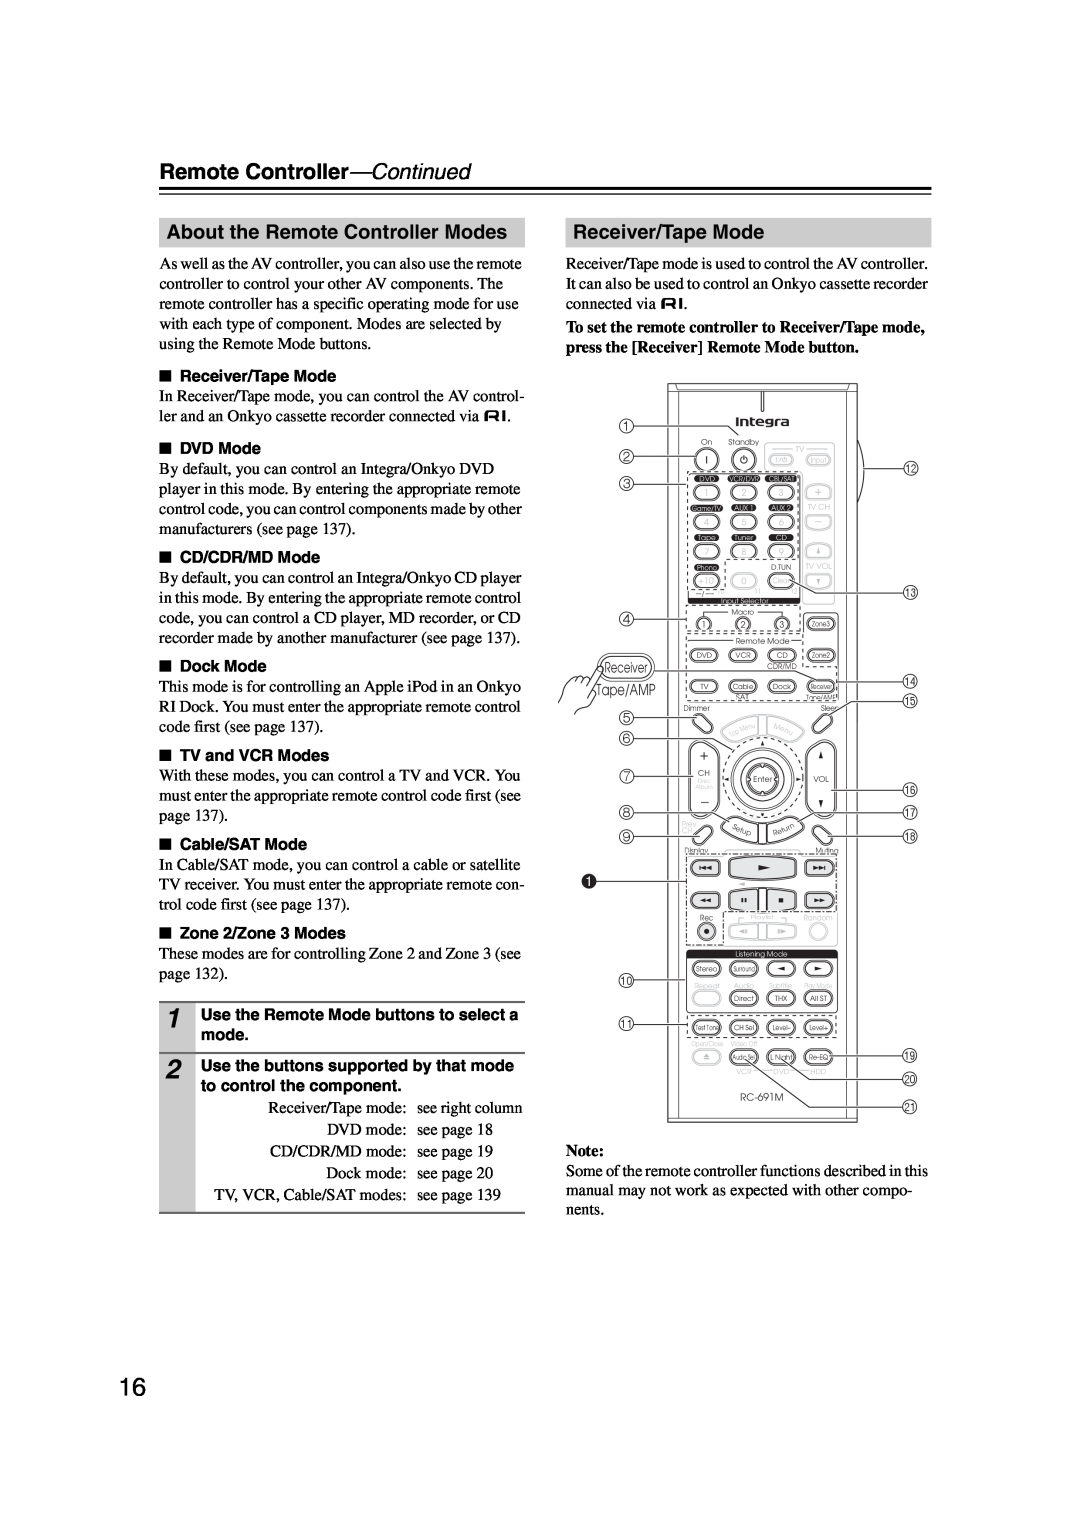 Integra DHC-9.9 instruction manual Remote Controller—Continued, About the Remote Controller Modes, Receiver/Tape Mode 